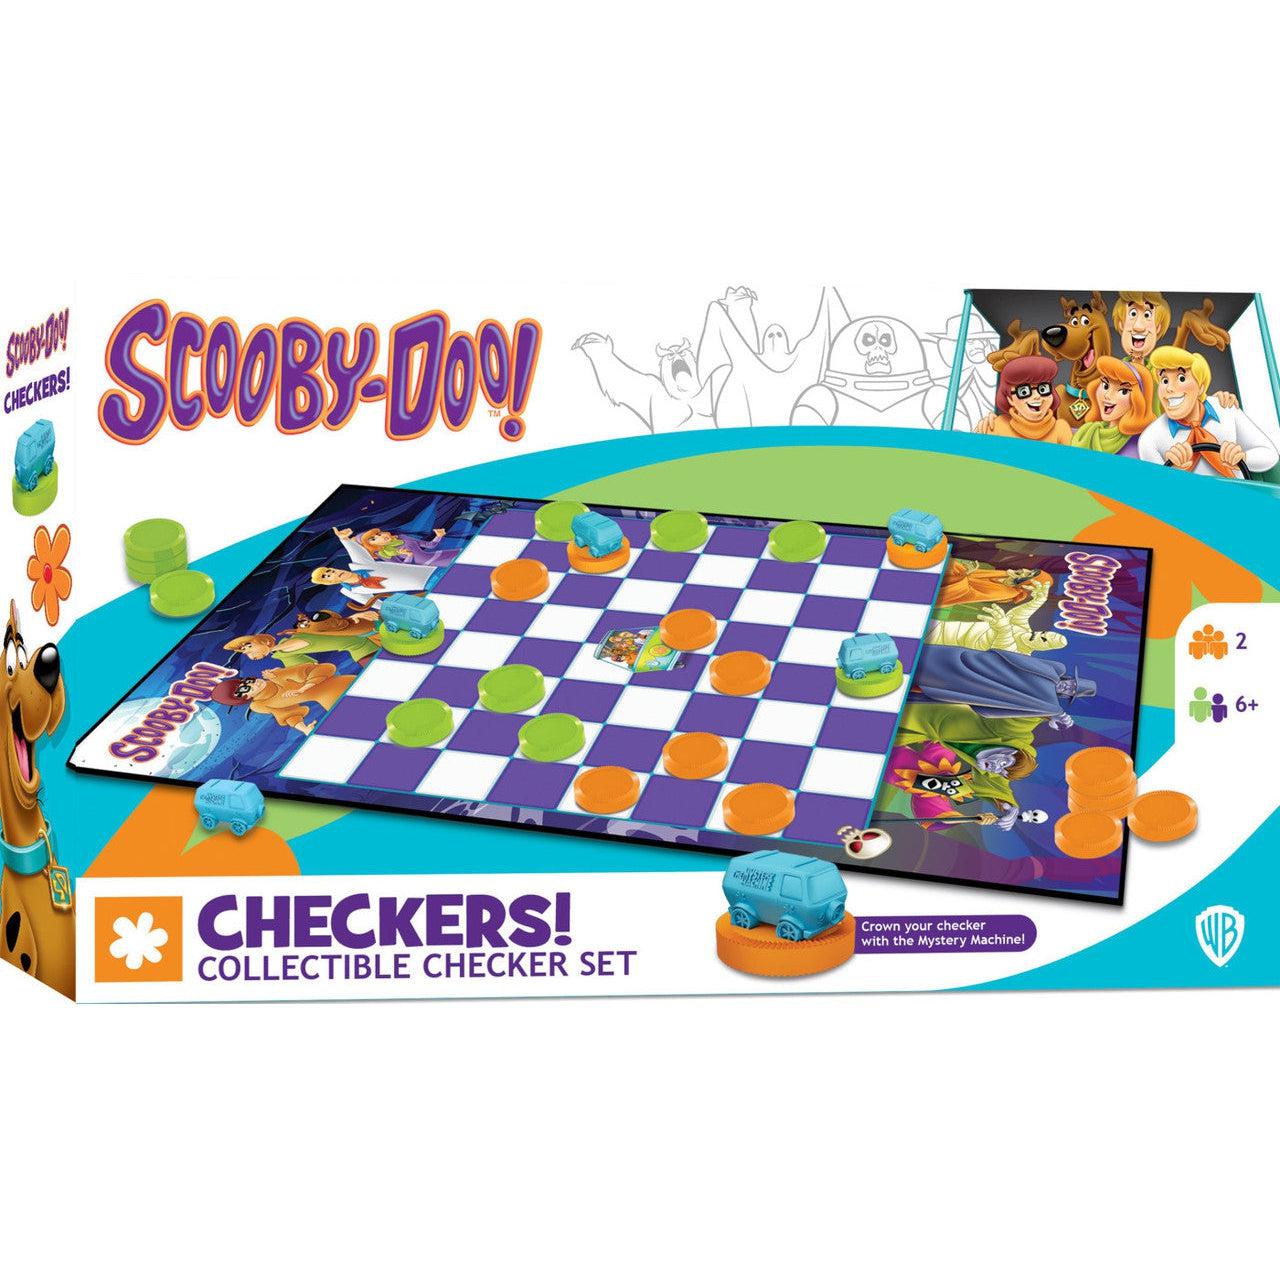 MasterPieces-Scooby-Doo Checkers-42321-Legacy Toys